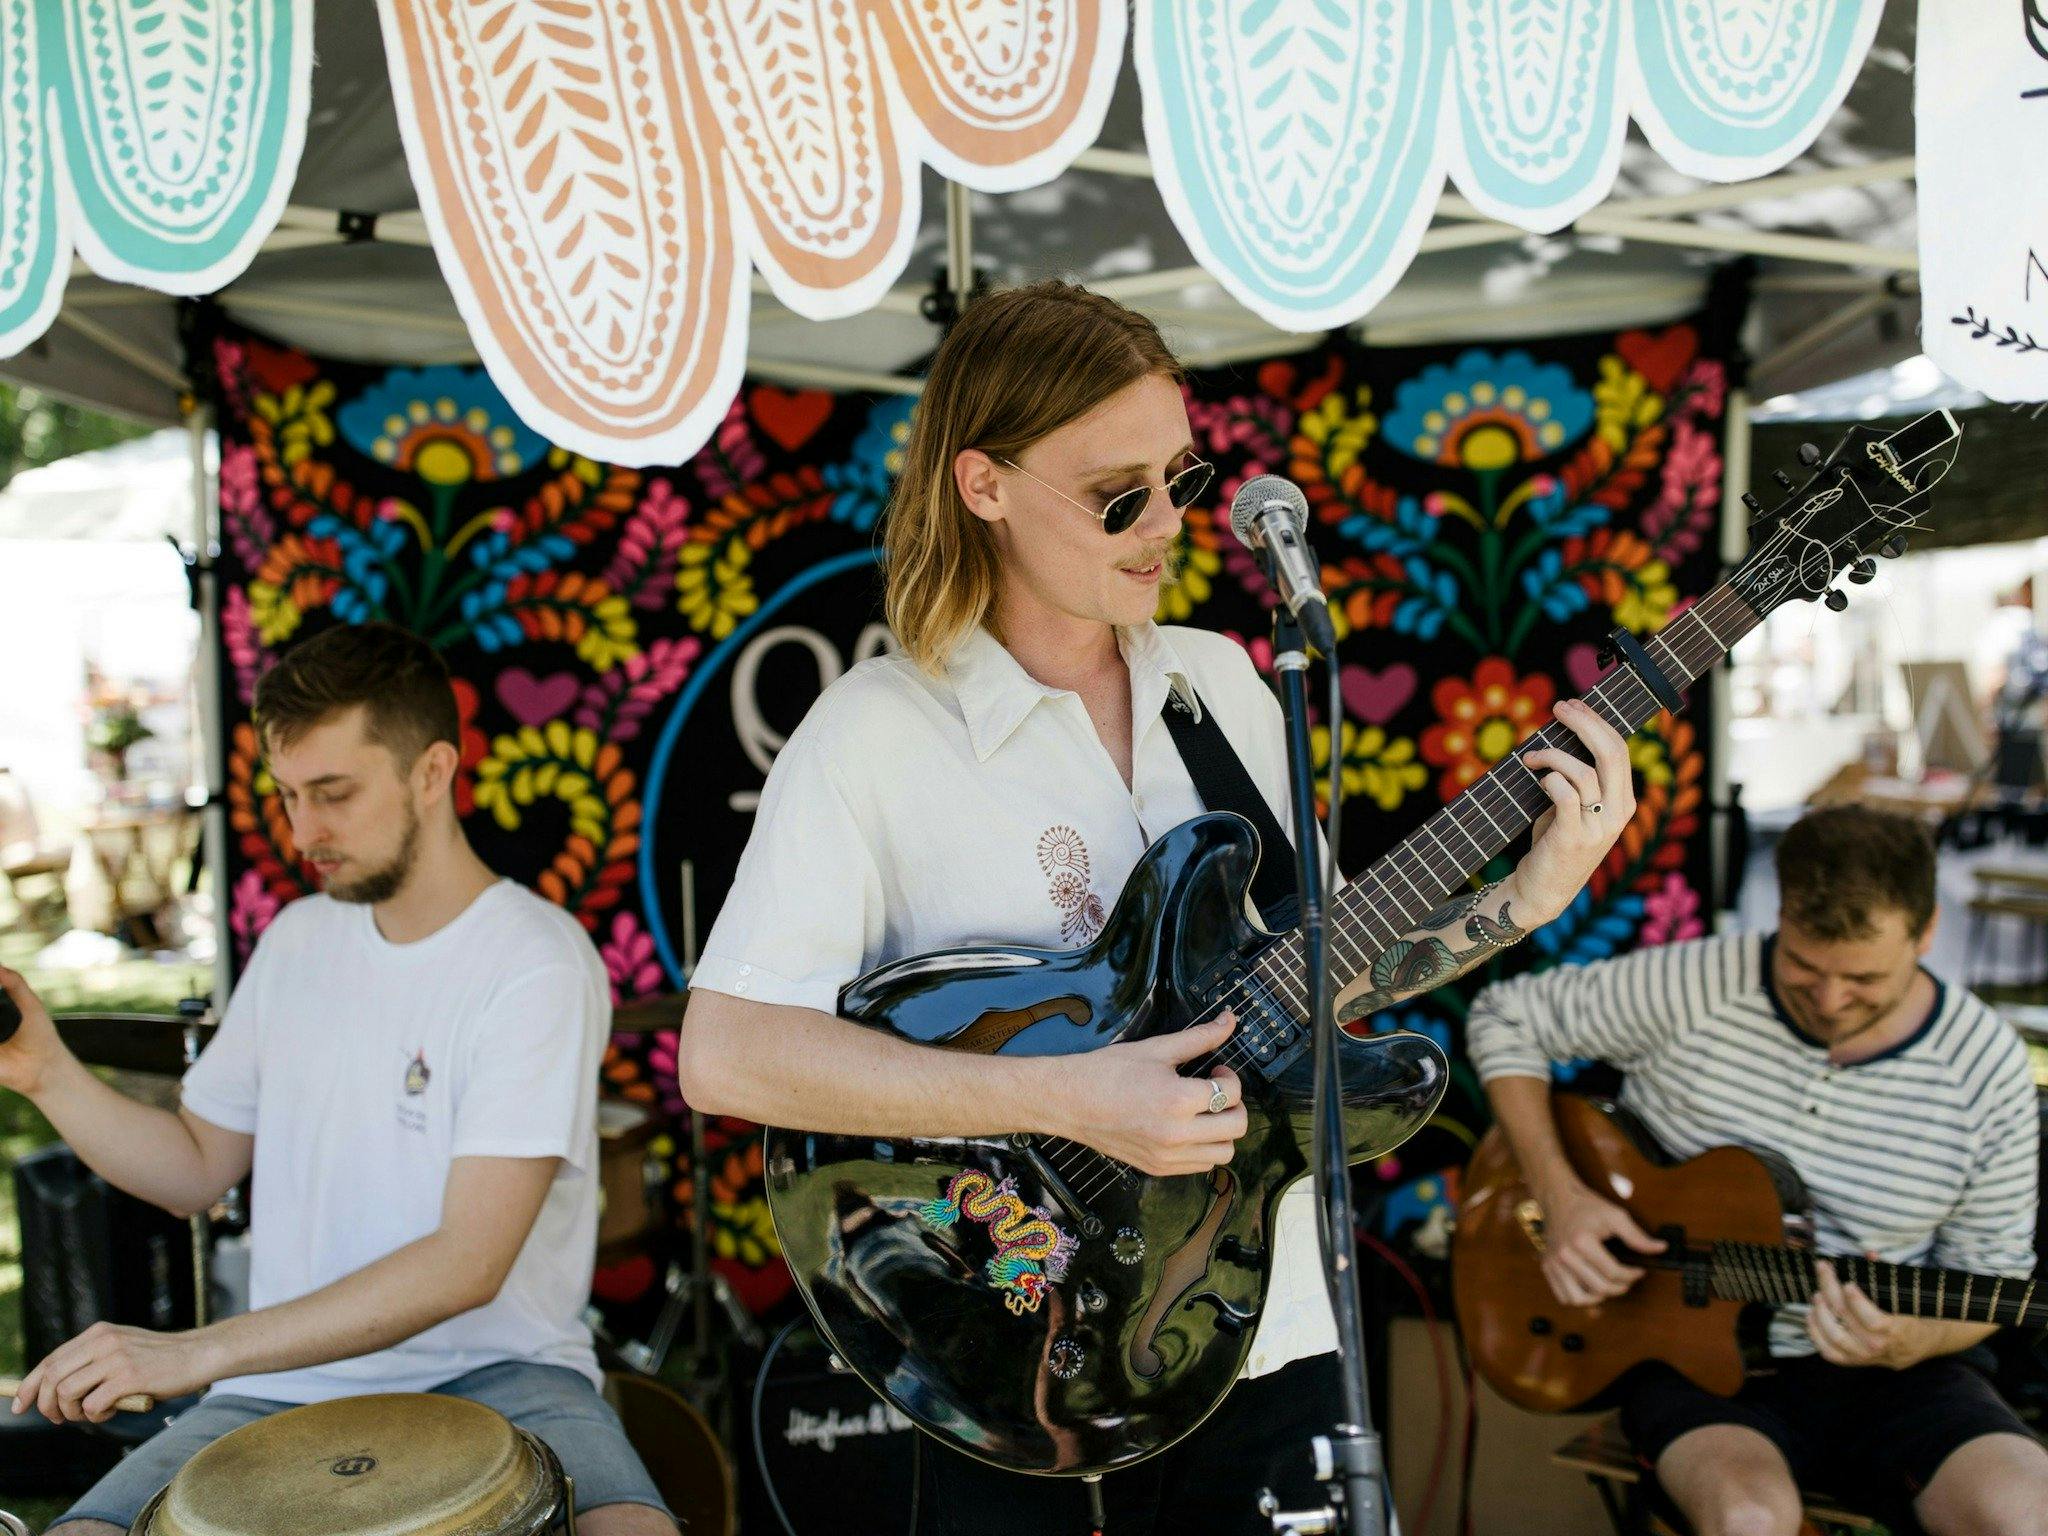 Relax to live music all day at The Olive Tree Market